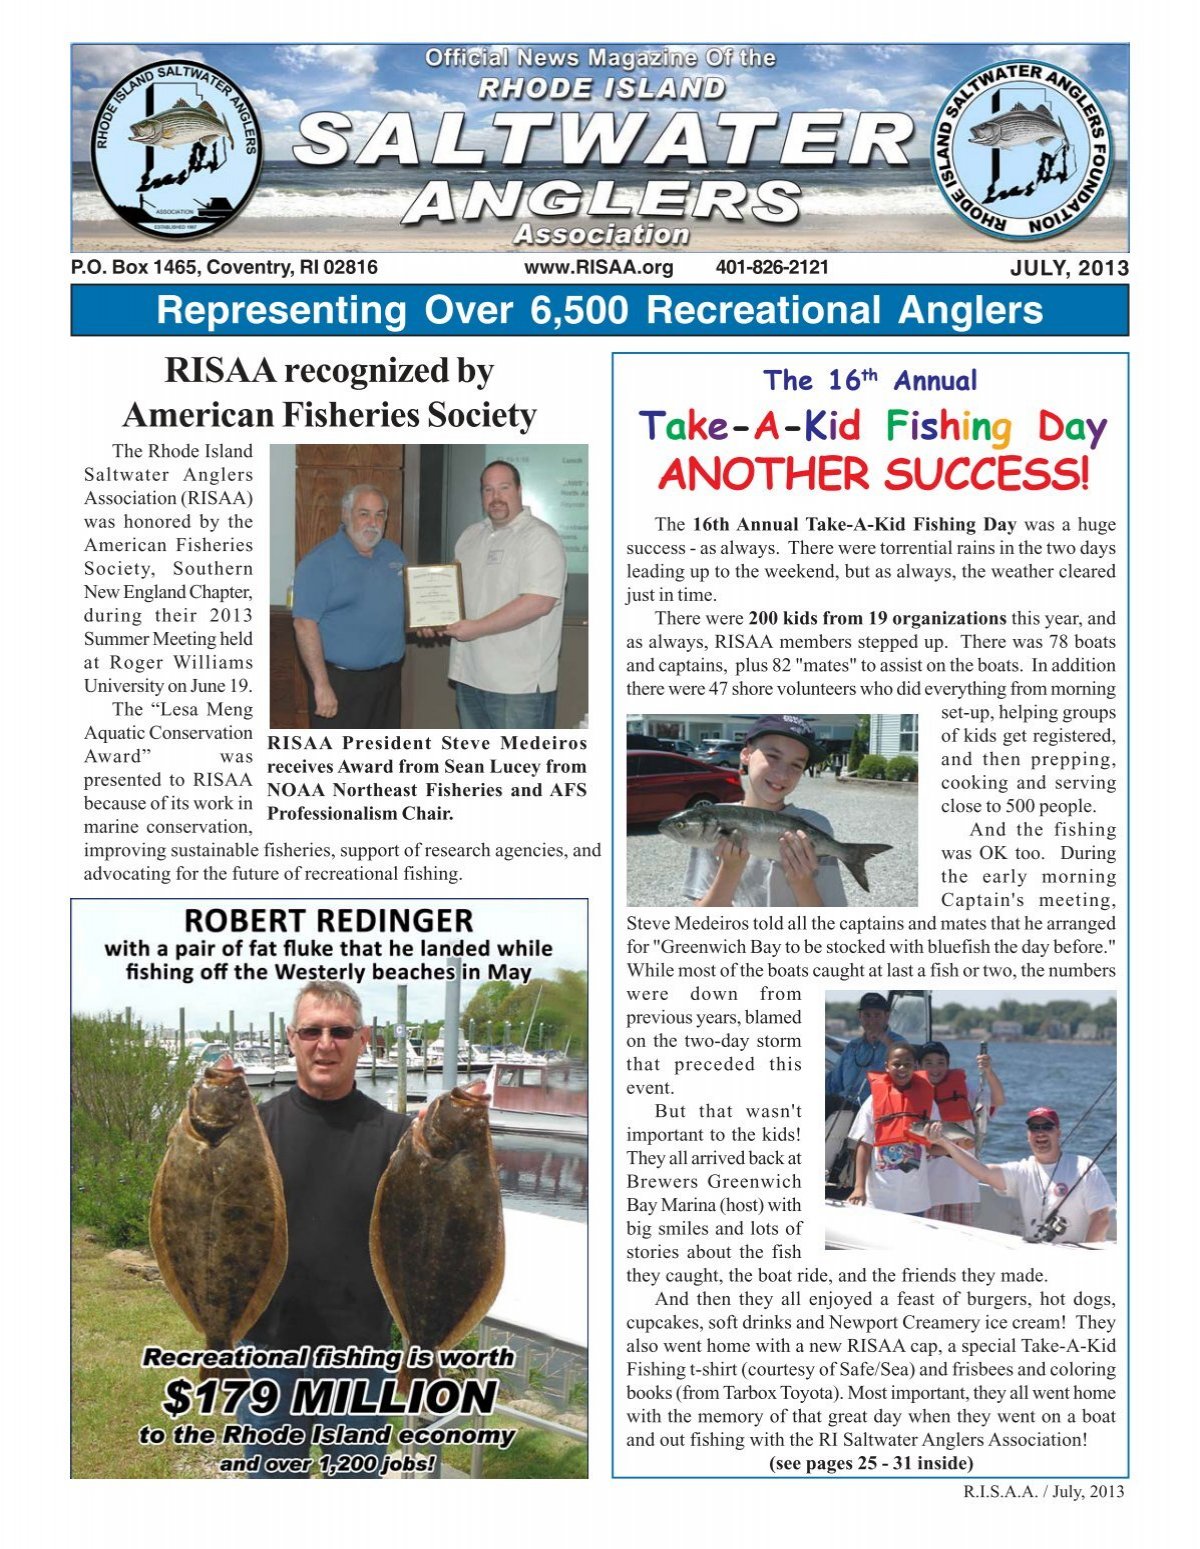 another success! - The Rhode Island Saltwater Anglers Association